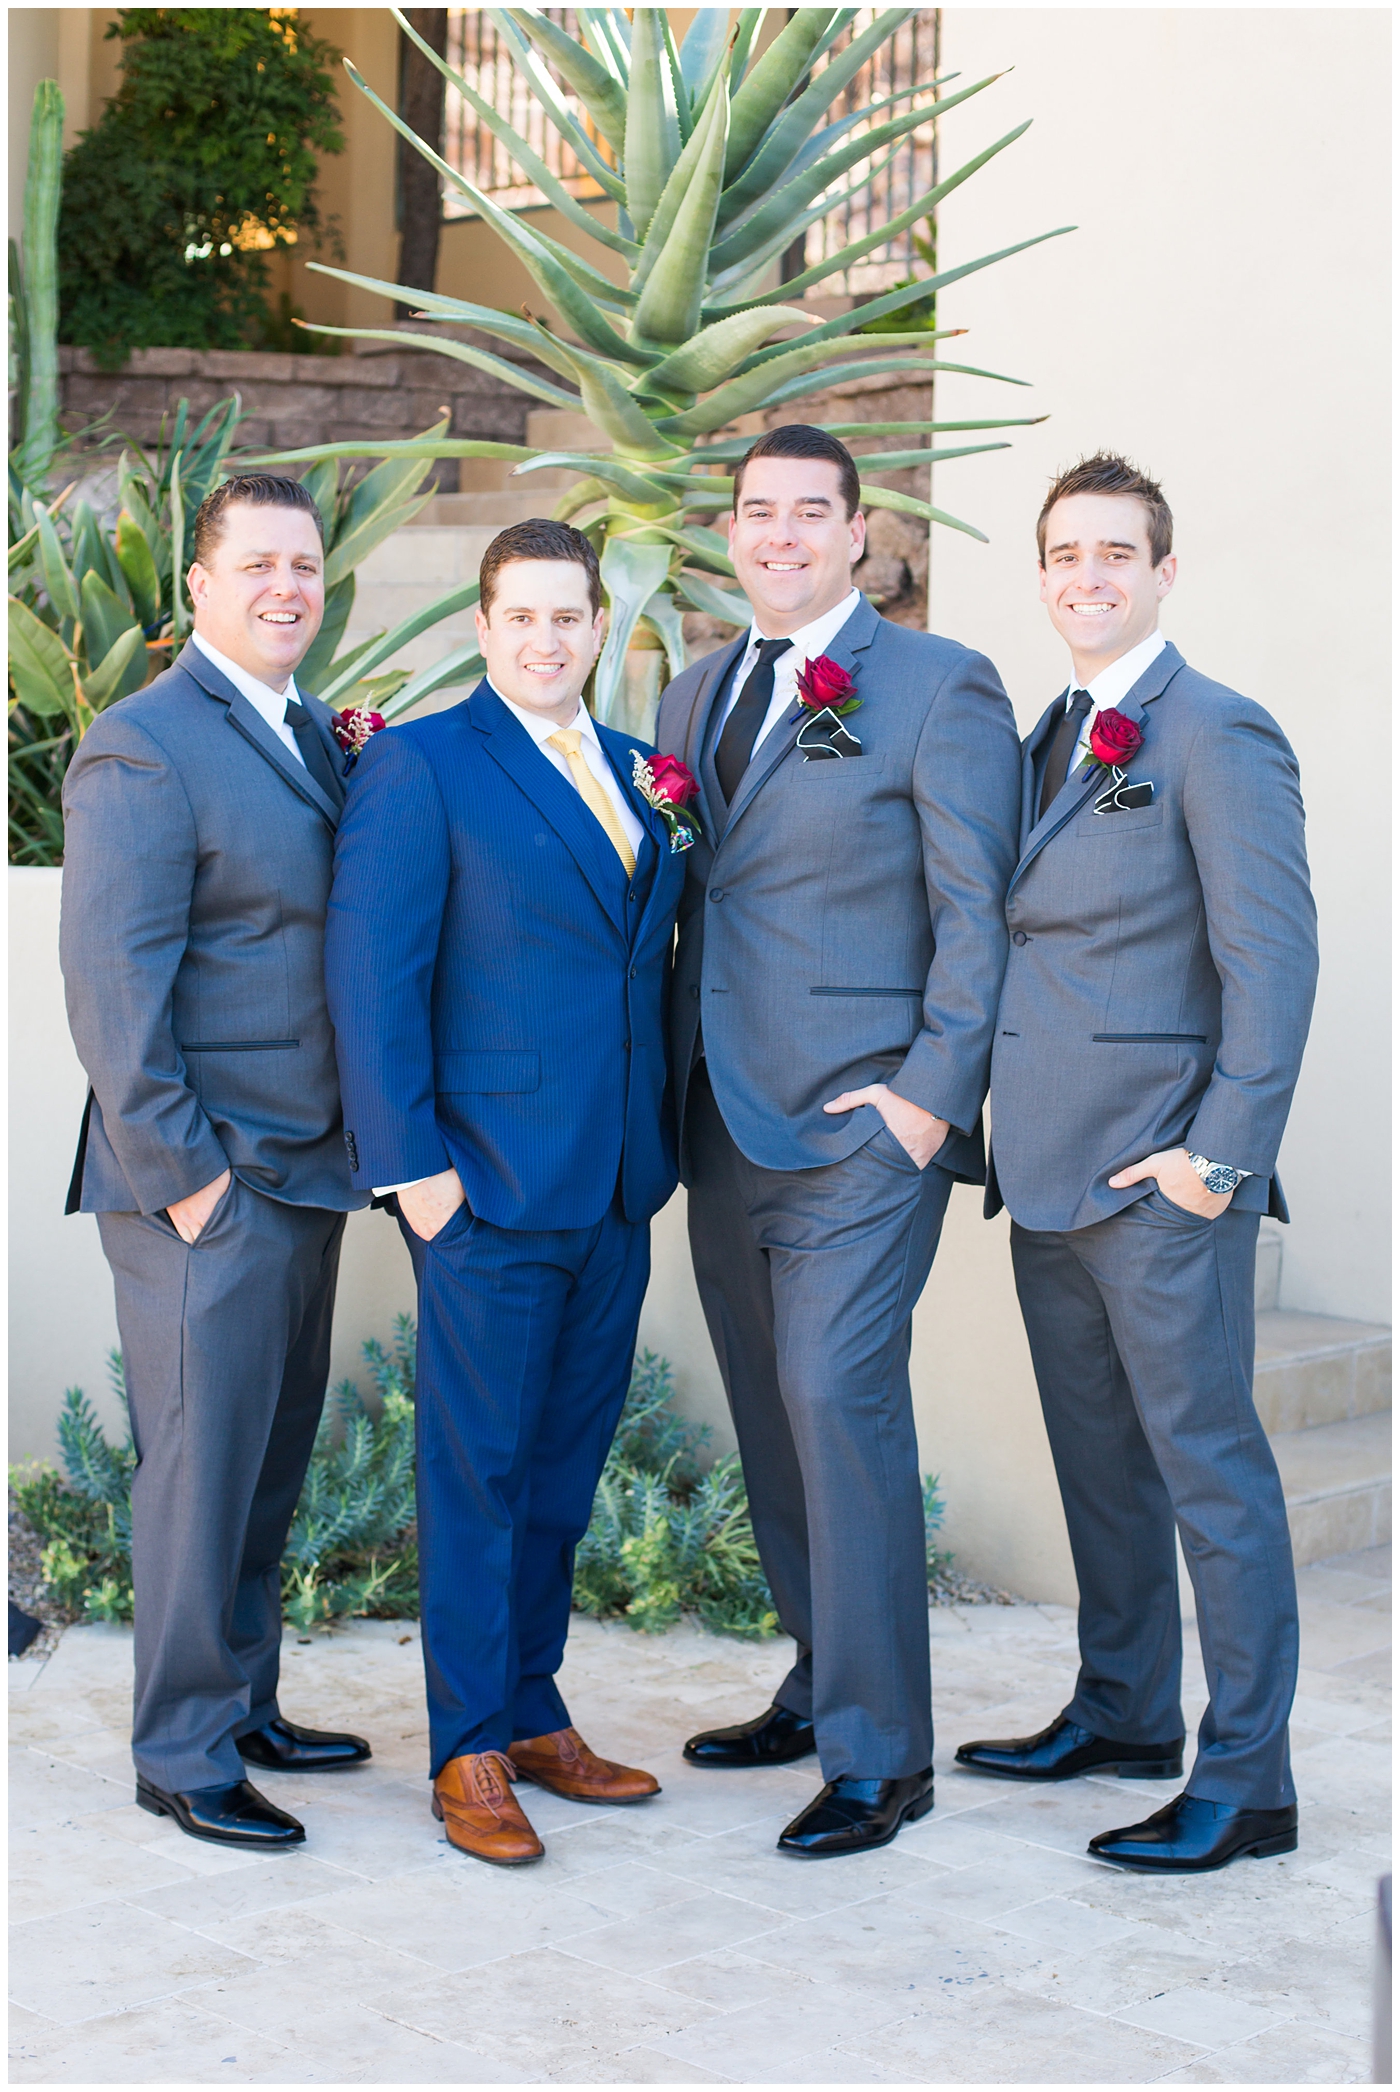 groom in blue suit with yellow tie and red rose boutonniere and groomsmen in gray suits